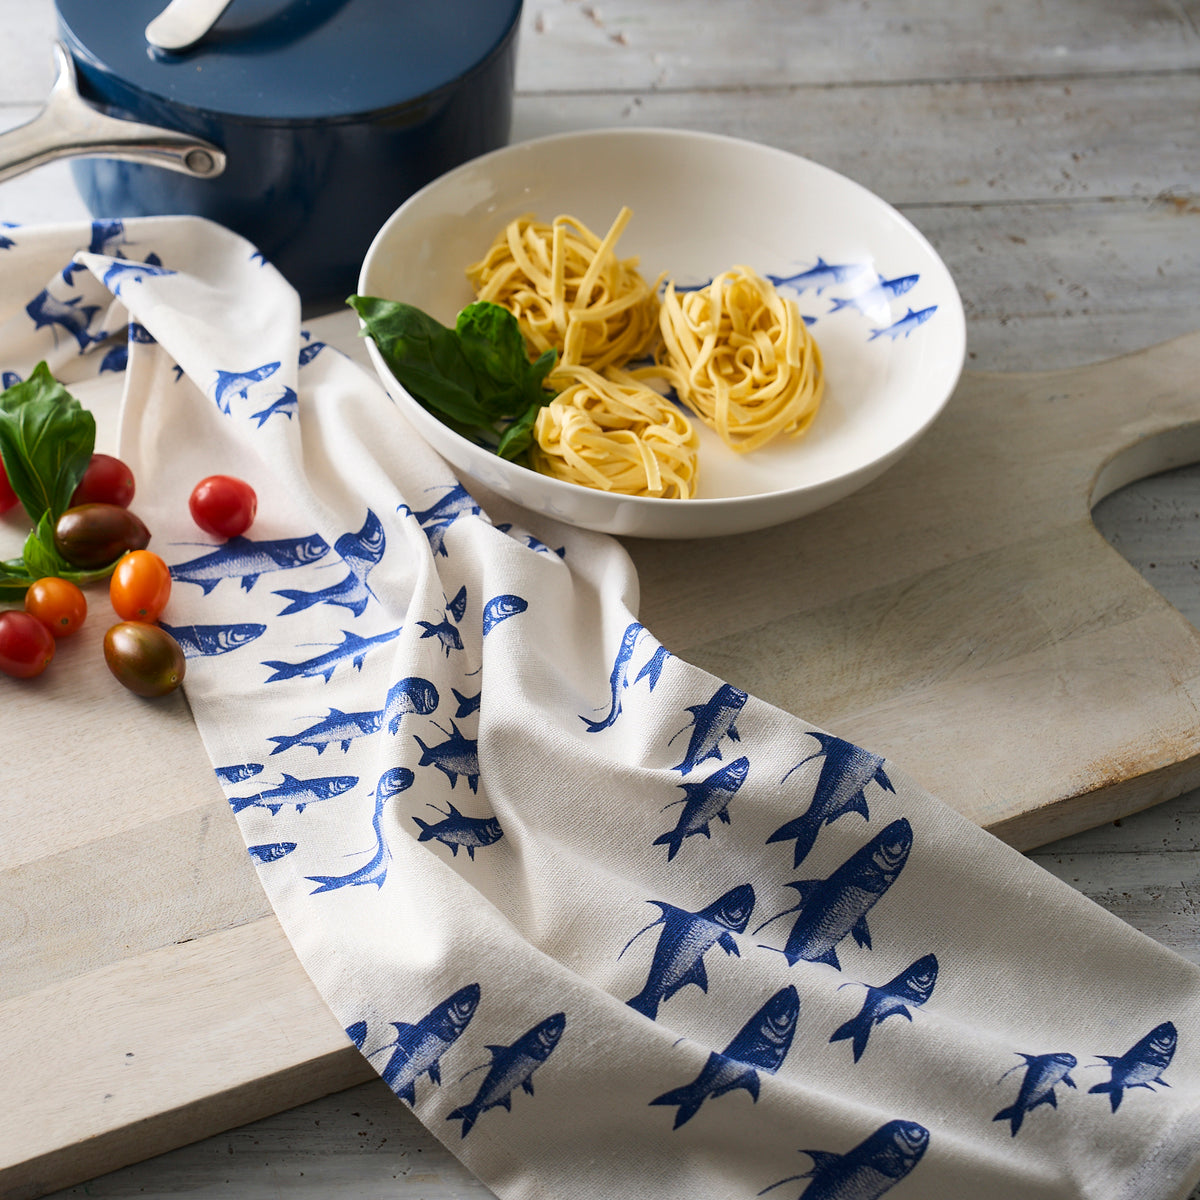 A school of fish patterned kitchen towel adn soup bowl on a cutting board from Caskata.